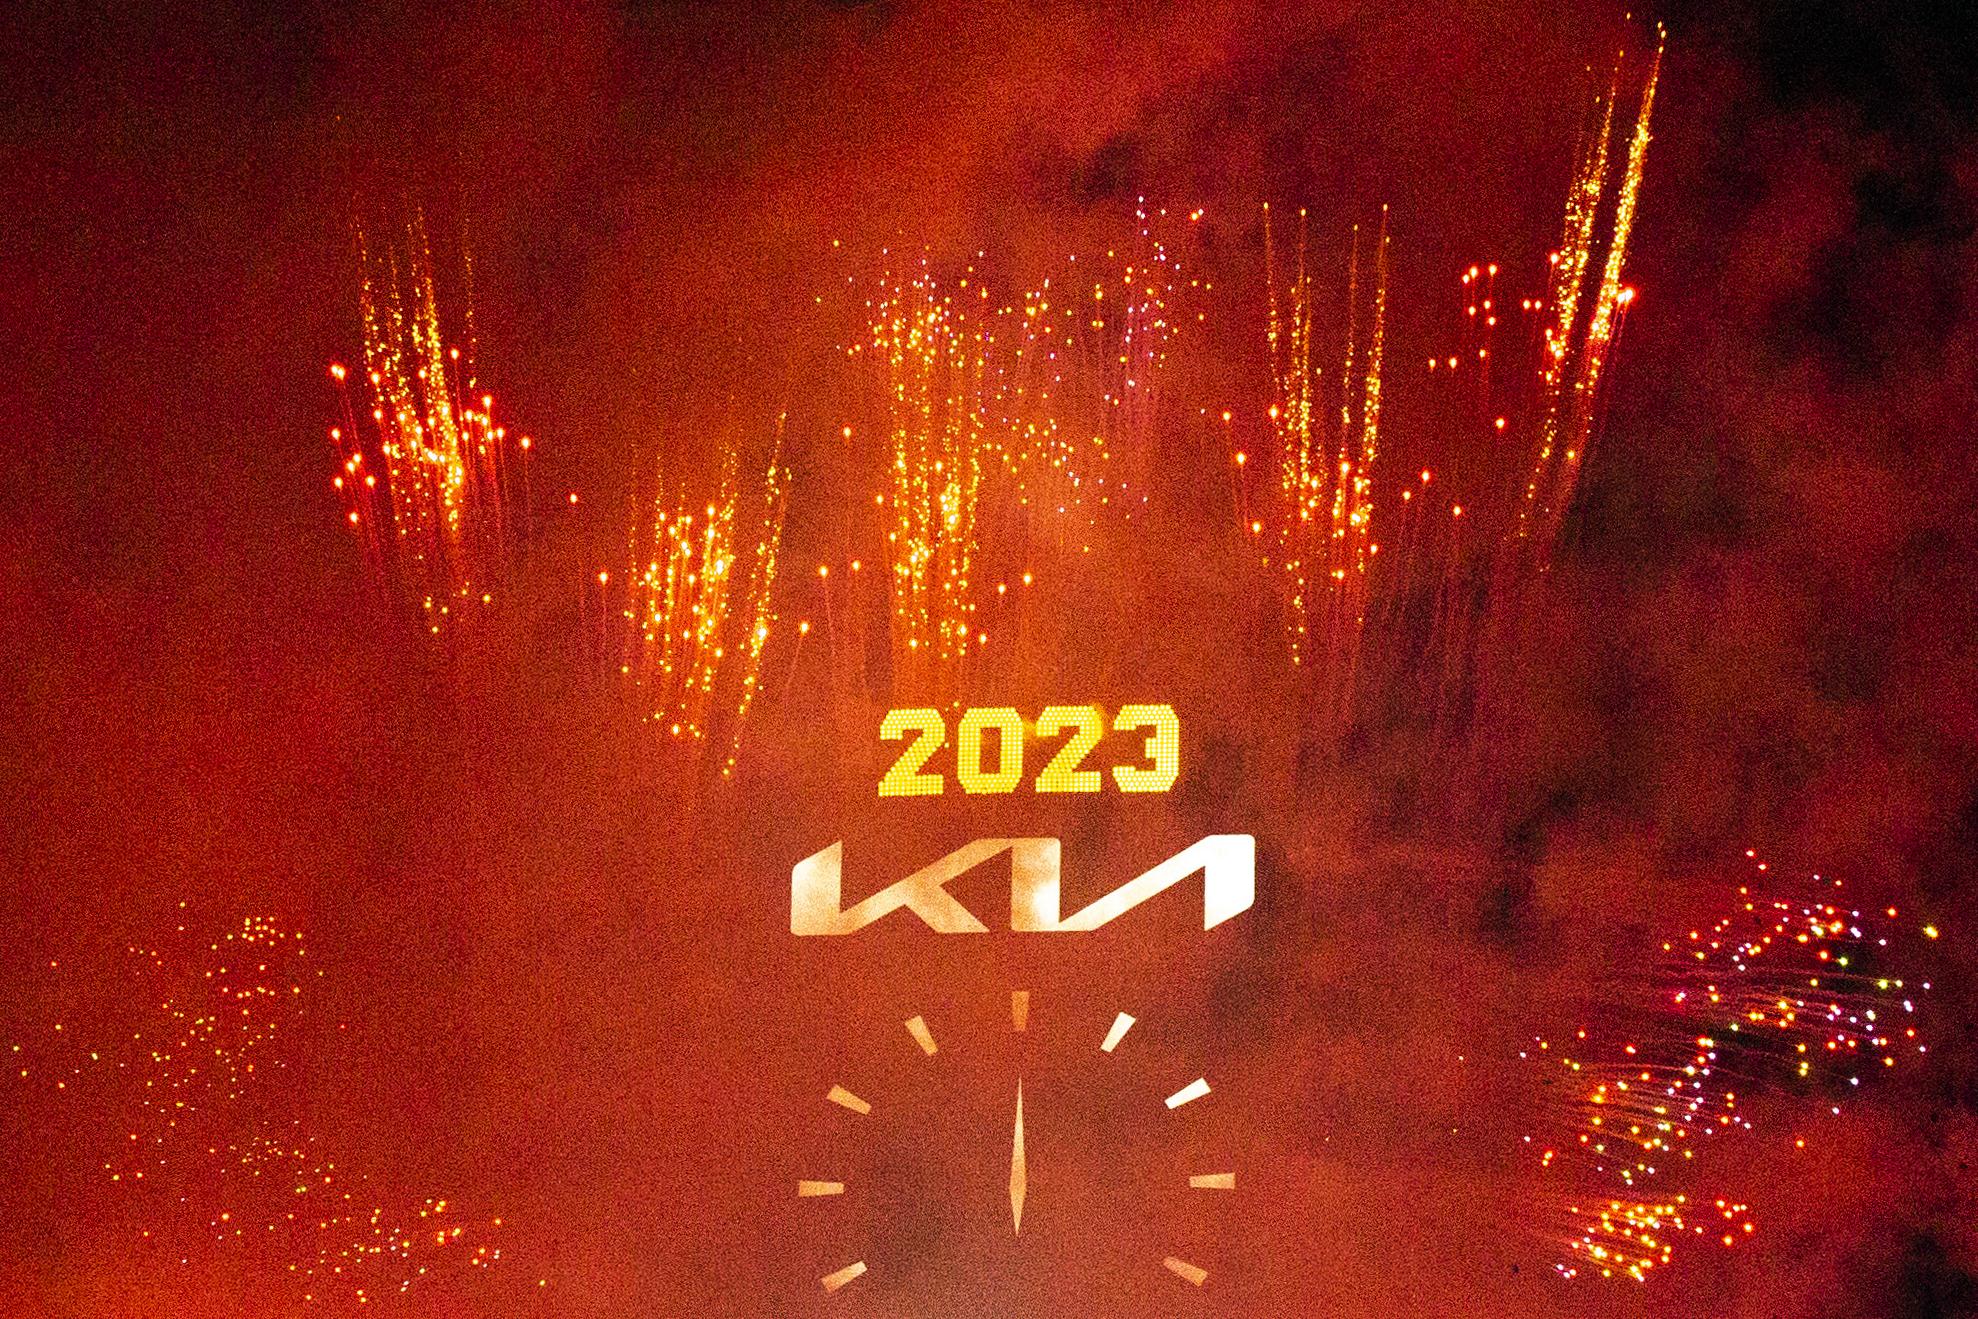 Times Square 2023 NYE Celebration - 2023 begins during the New Years Eve celebration in Times...